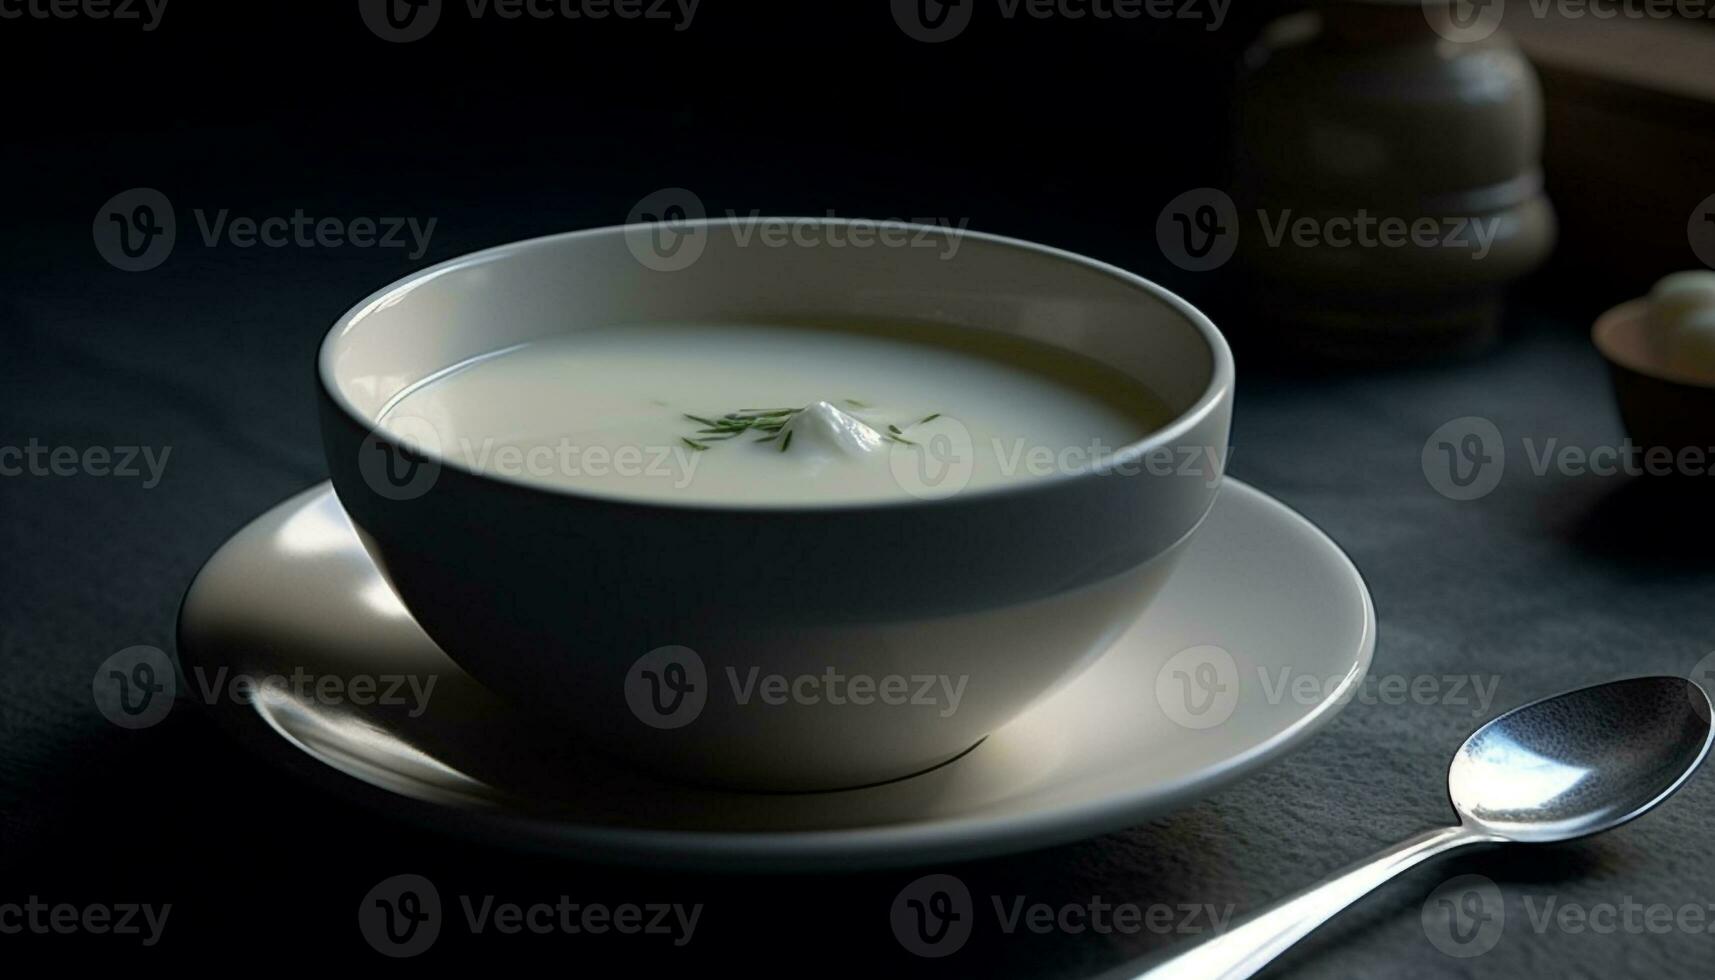 https://static.vecteezy.com/system/resources/previews/027/906/444/non_2x/fresh-vegetable-cream-soup-in-elegant-crockery-on-table-indoors-generated-by-ai-photo.jpg